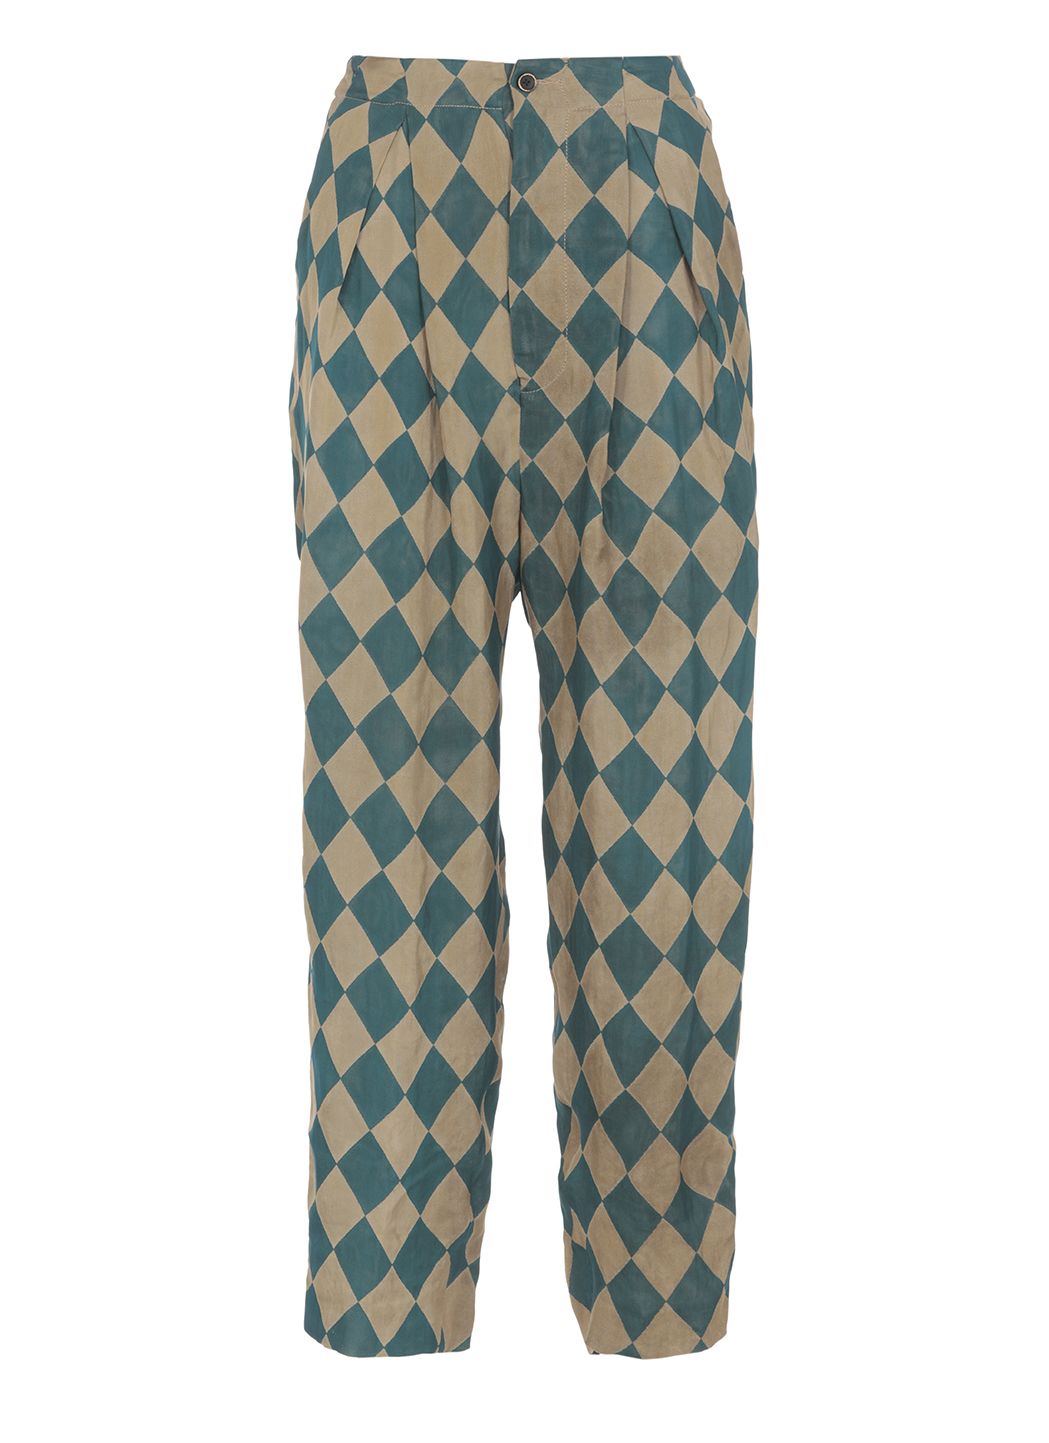 Trousers with diamonds